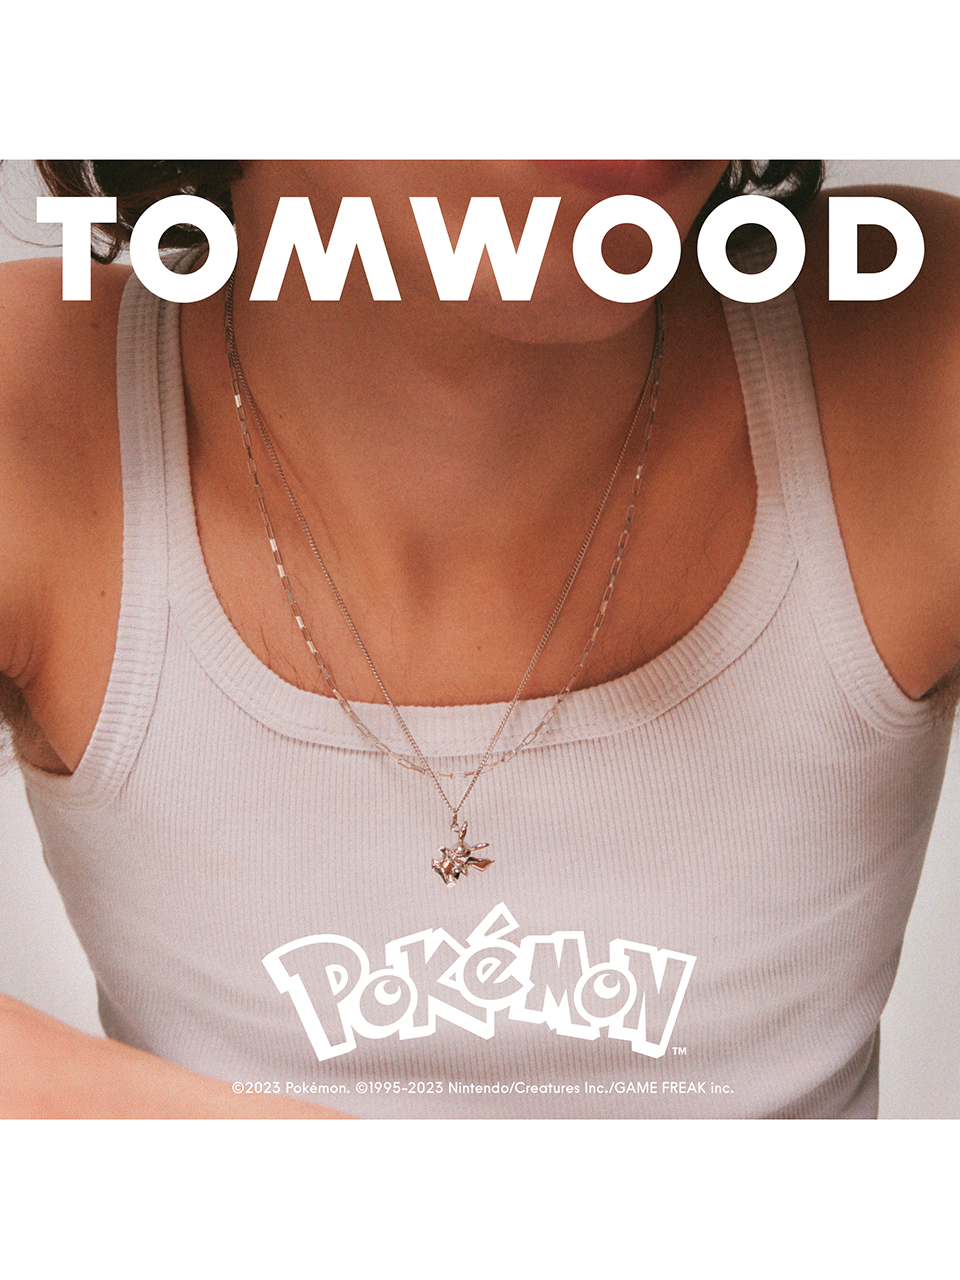 TOMWOOD × Pokémon Collaboration will launch soon!!